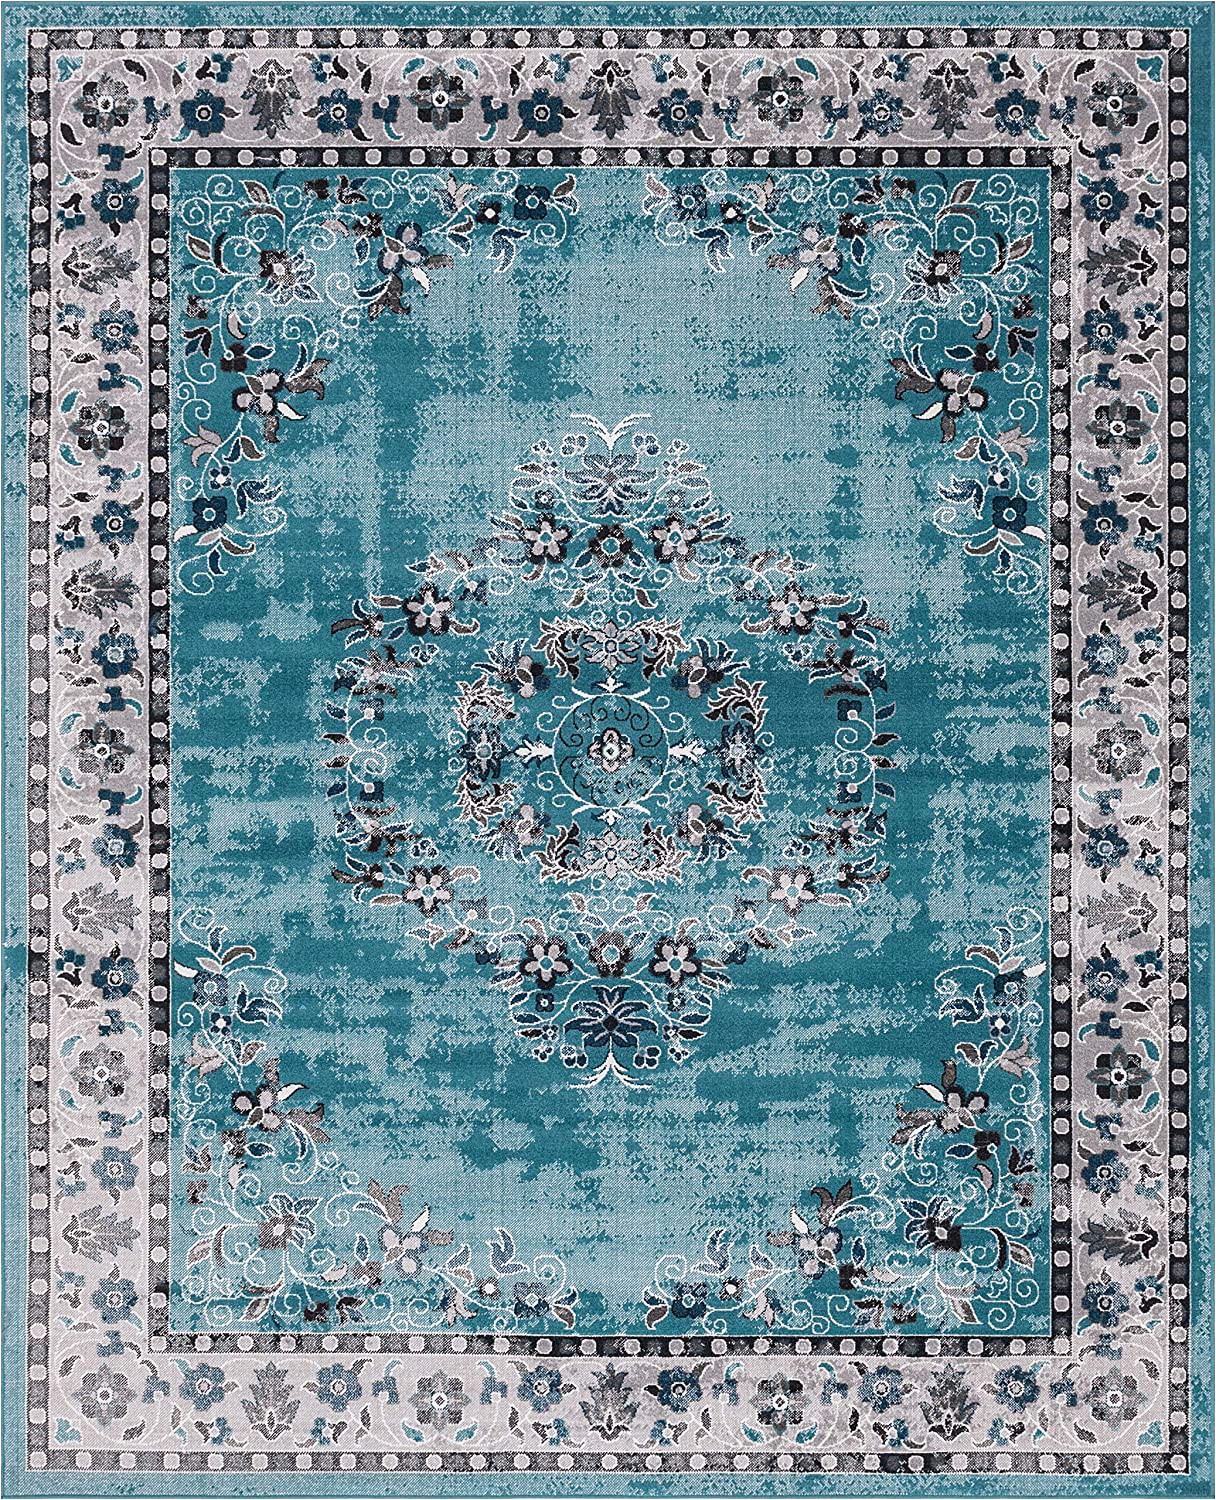 Large Teal Blue area Rugs Amazon Rugs Lucerne Collection area Rug – 8×10 Blue